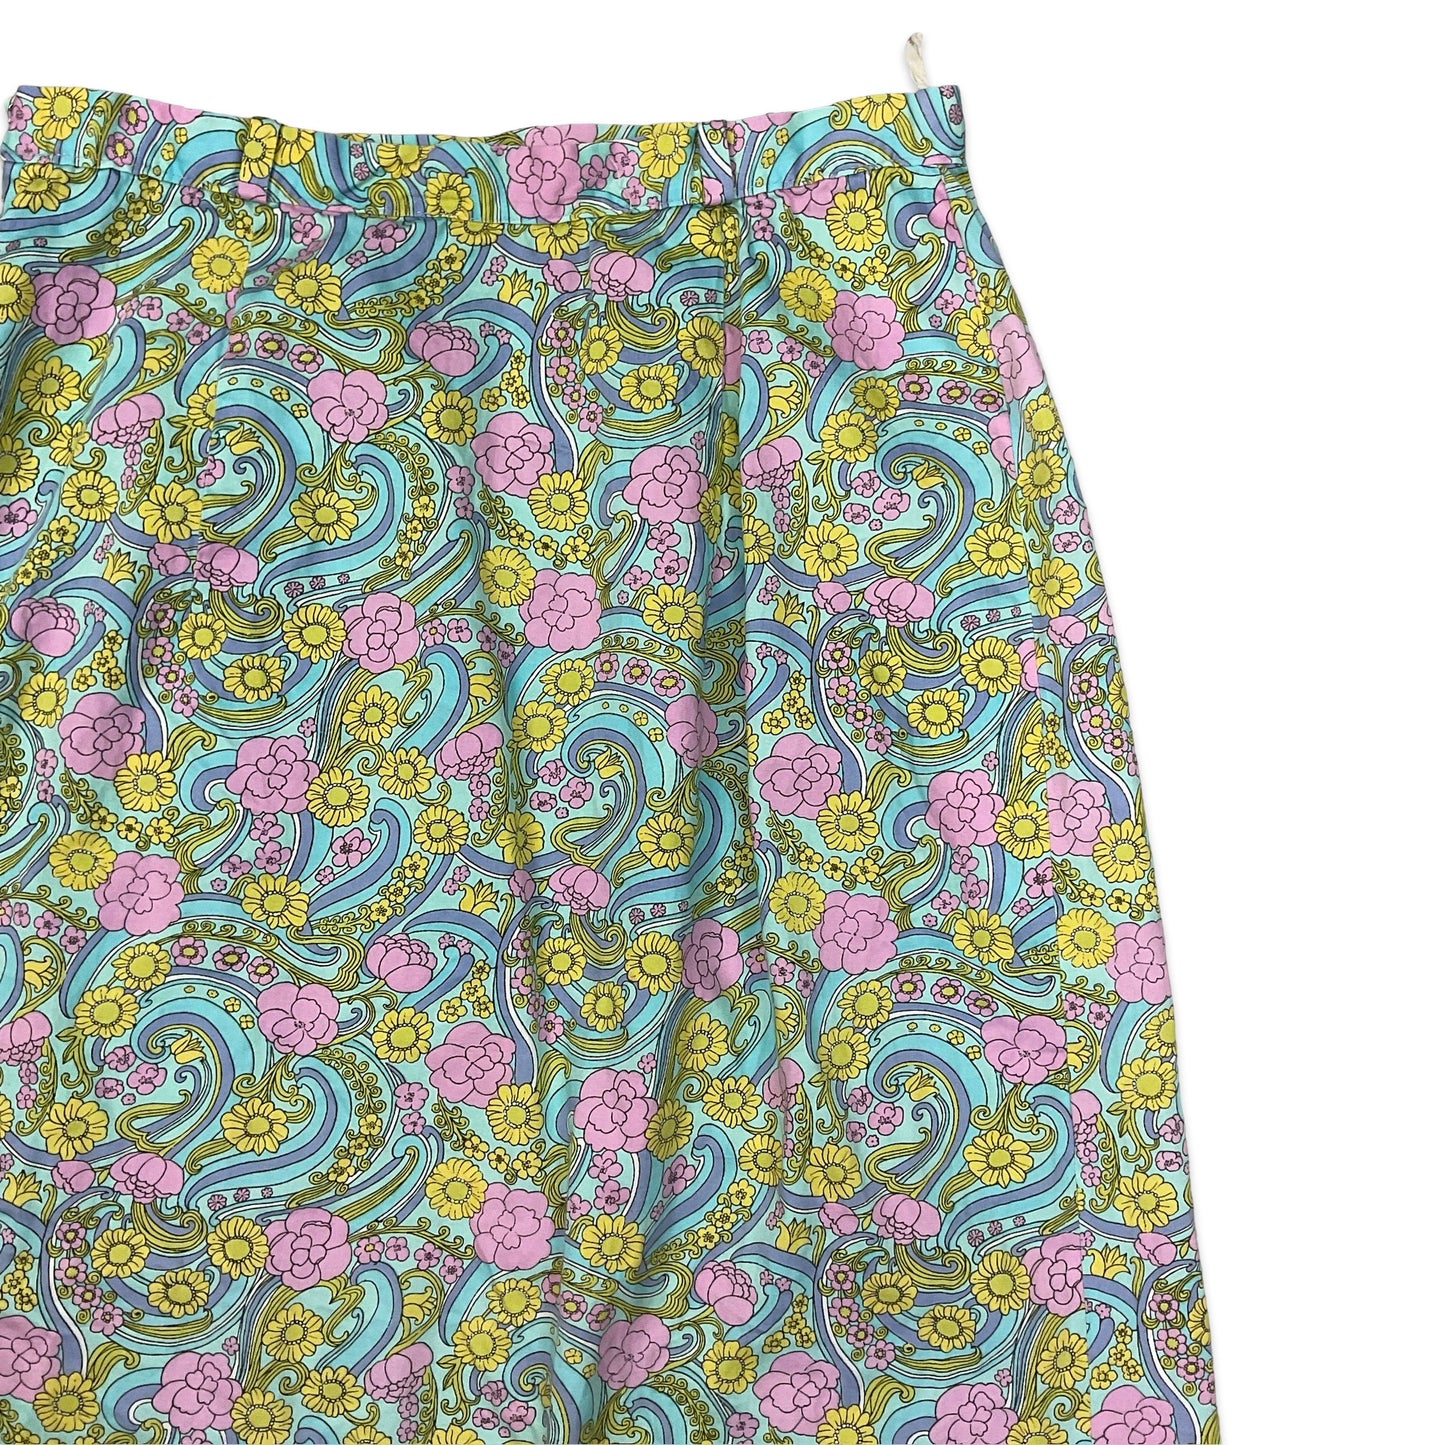 Vintage 70s Pink Yellow & Blue Psychedelic Floral Print A-line Midi Skirt 8